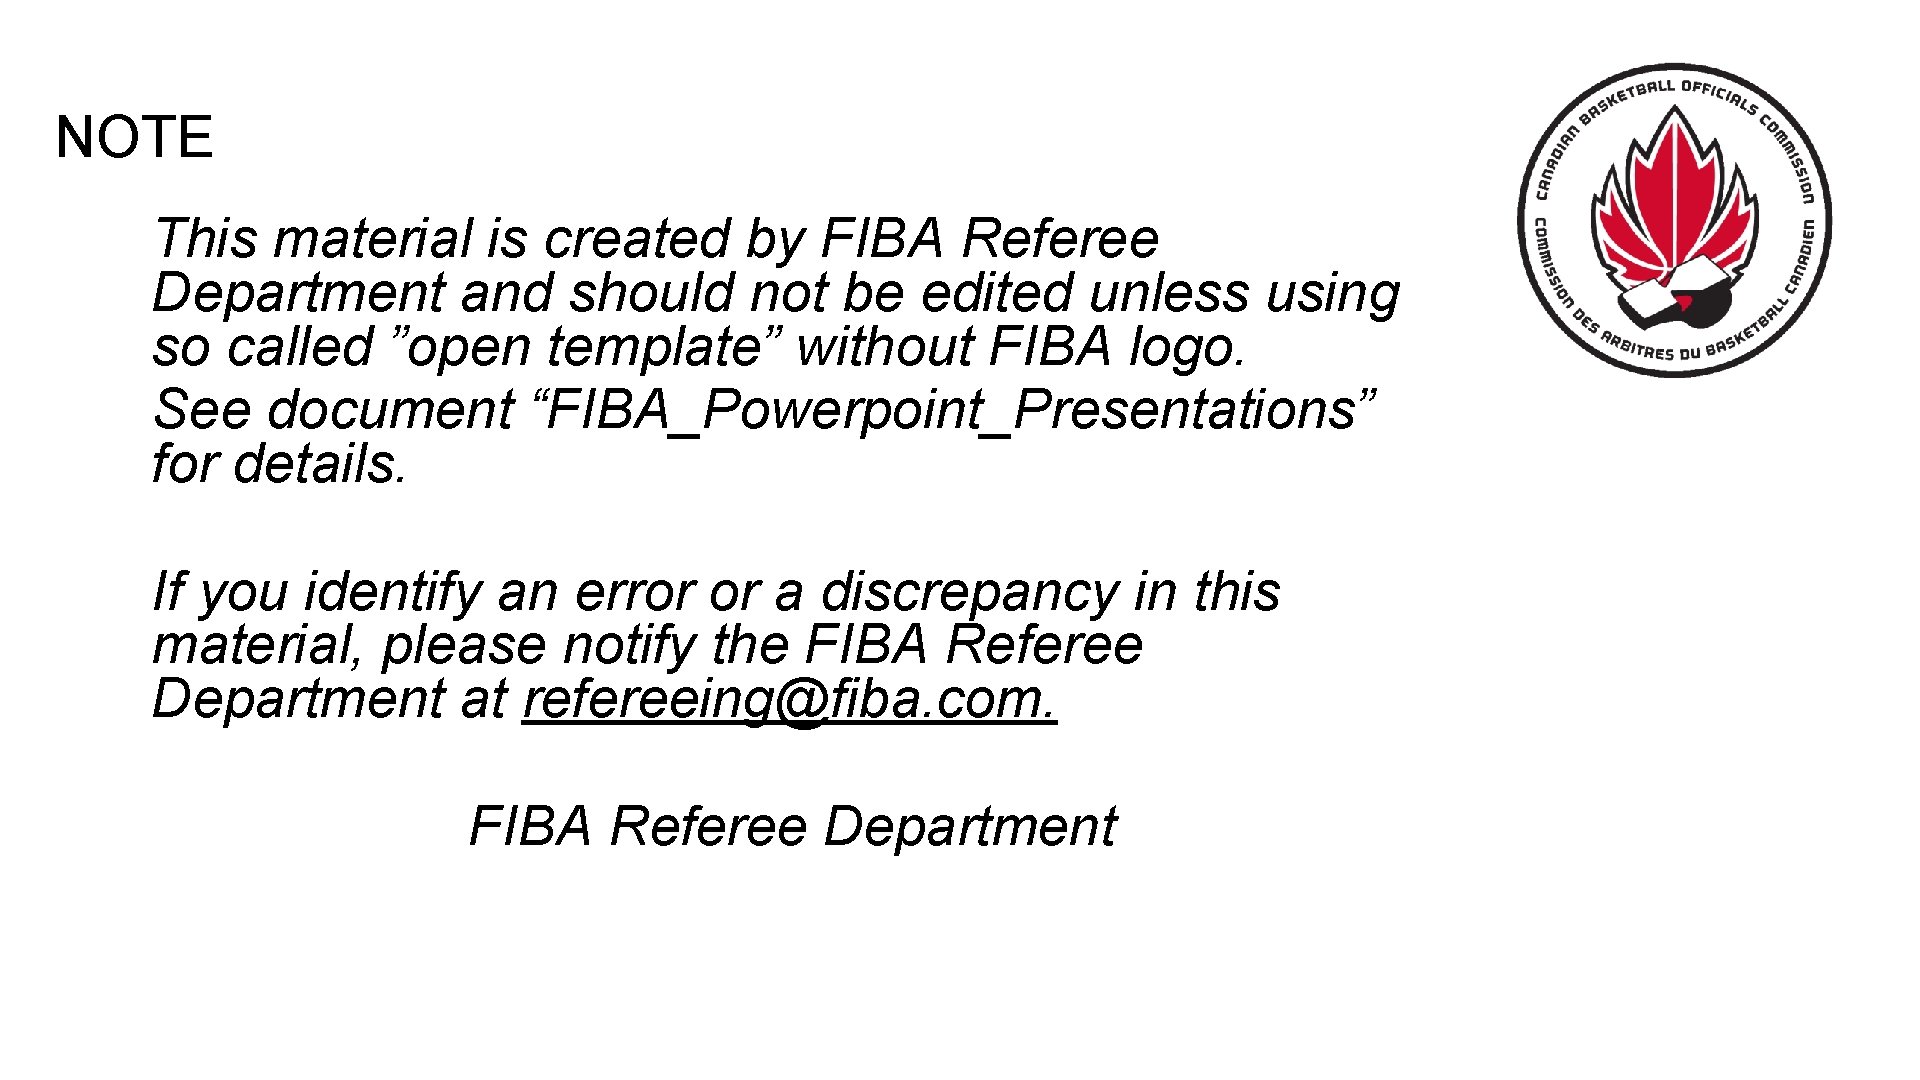 NOTE This material is created by FIBA Referee Department and should not be edited